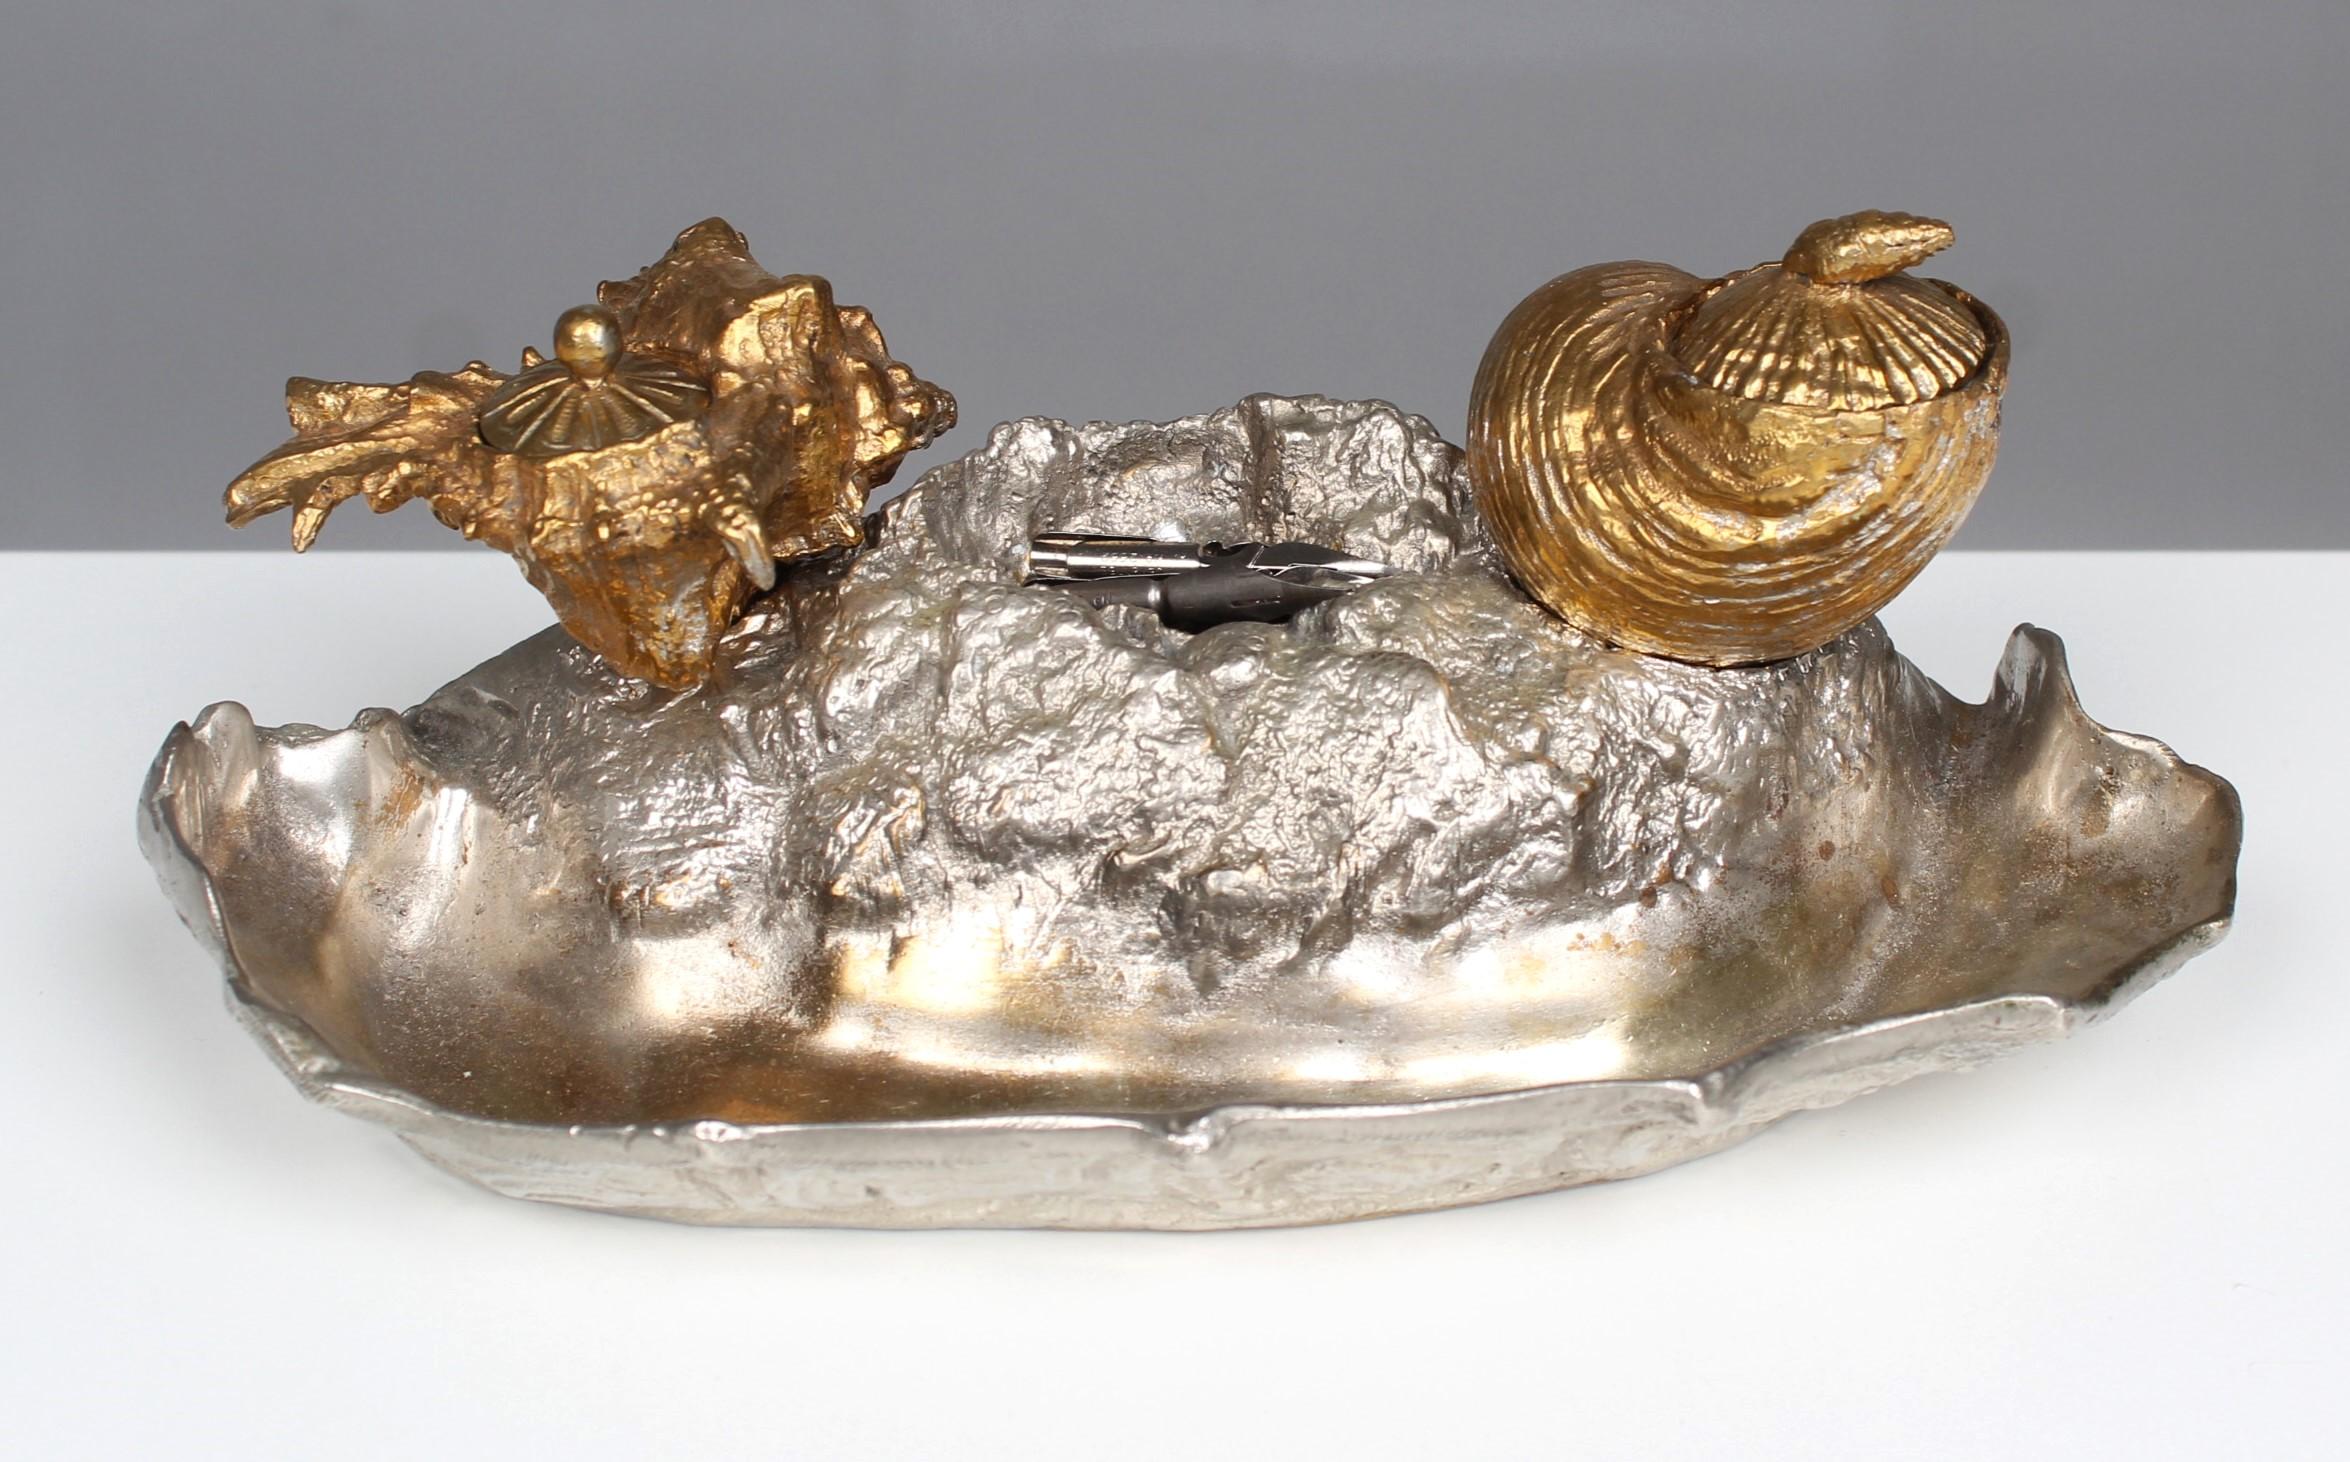 Beautiful antique inkwell from gilded and silvered bronze.
France, mid 19th Century.
Exceptionally beautifully crafted shells as inkwells on a tray as a pen holder, which is depicted as a sandy ground.



